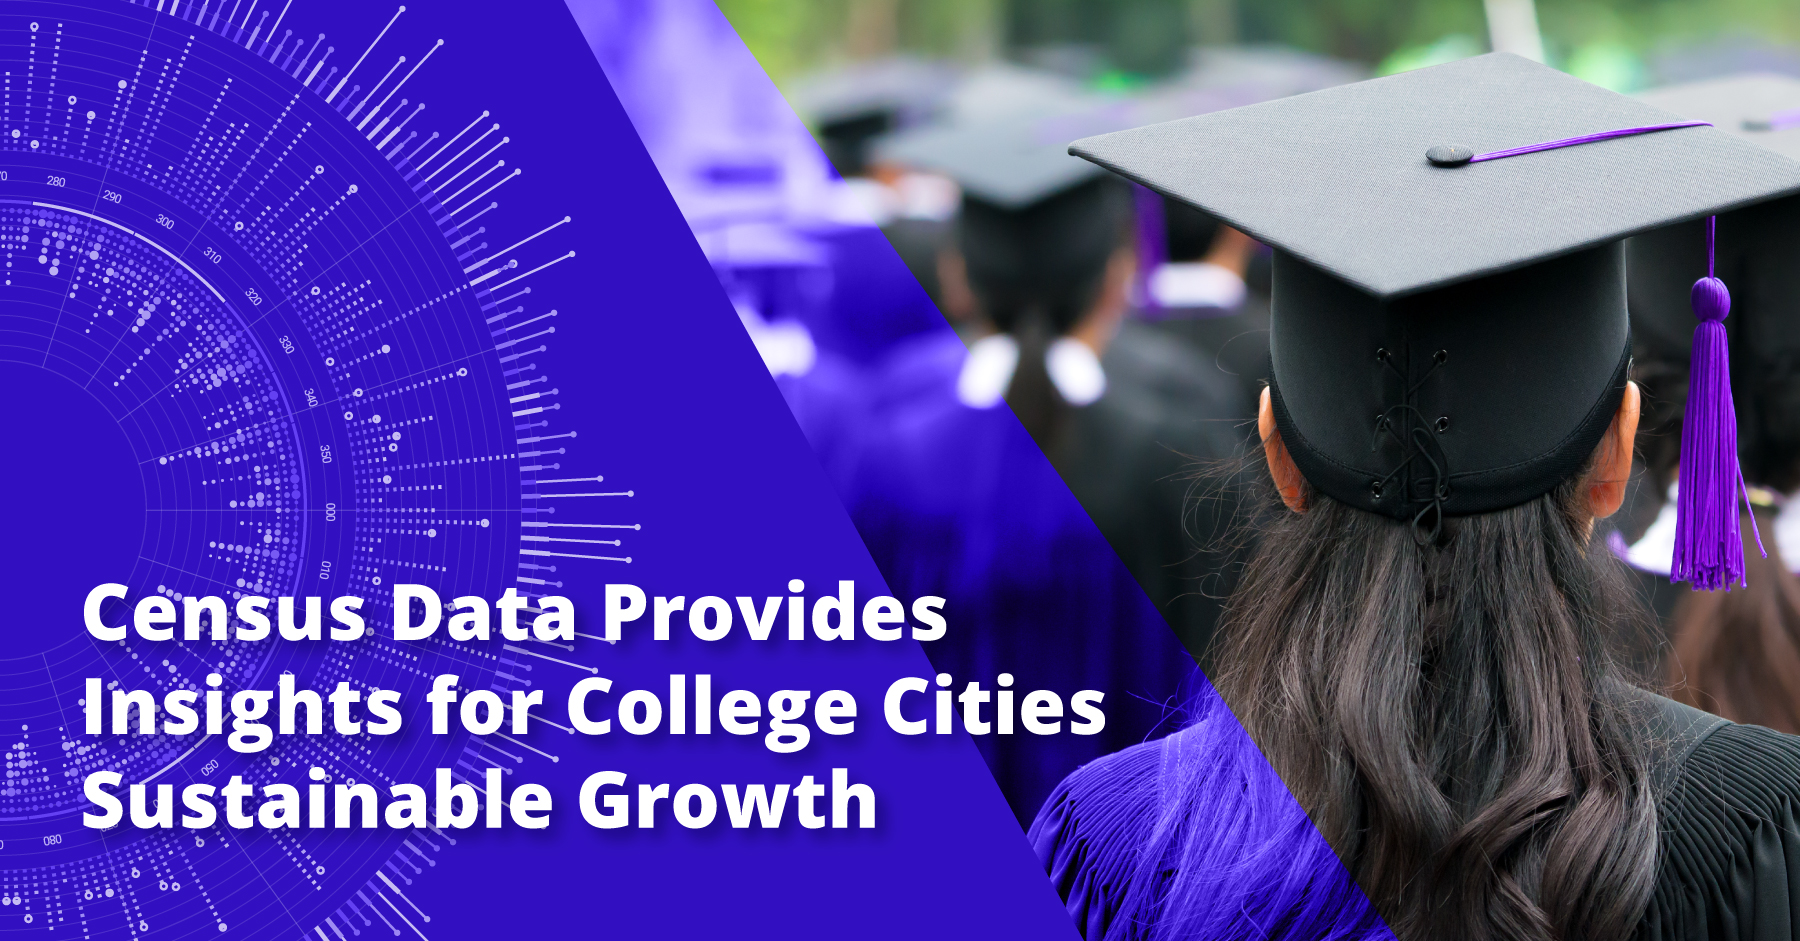 Census Data Provides Insights for College Cities Sustainable Growth